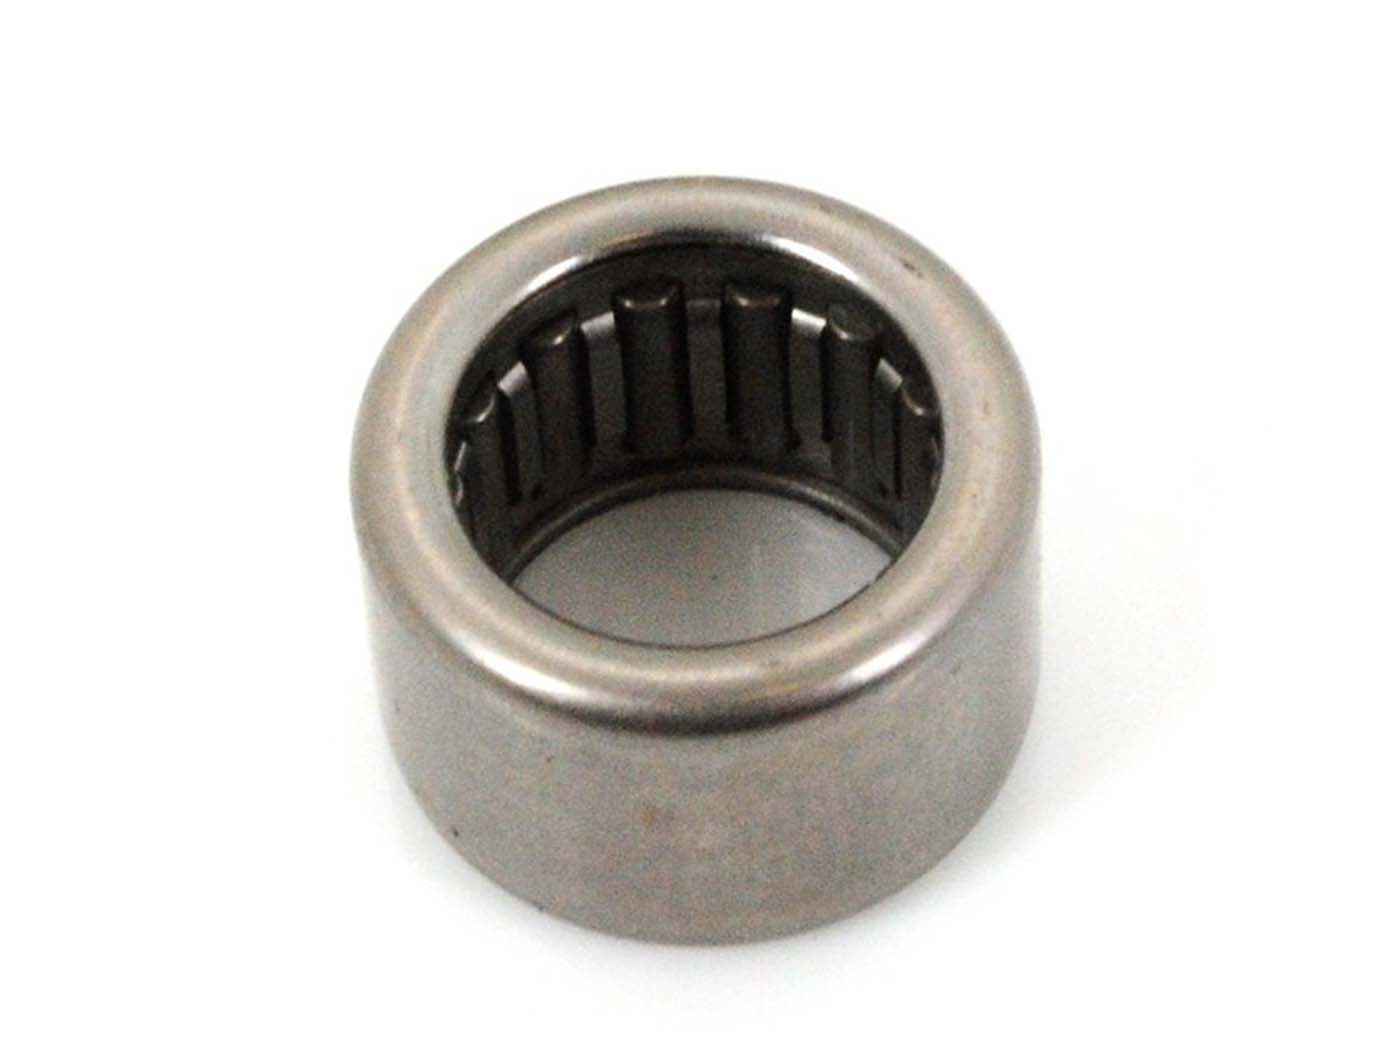 Connecting Rod Bearing Piston Pin For Velo Solex Moped, Moped